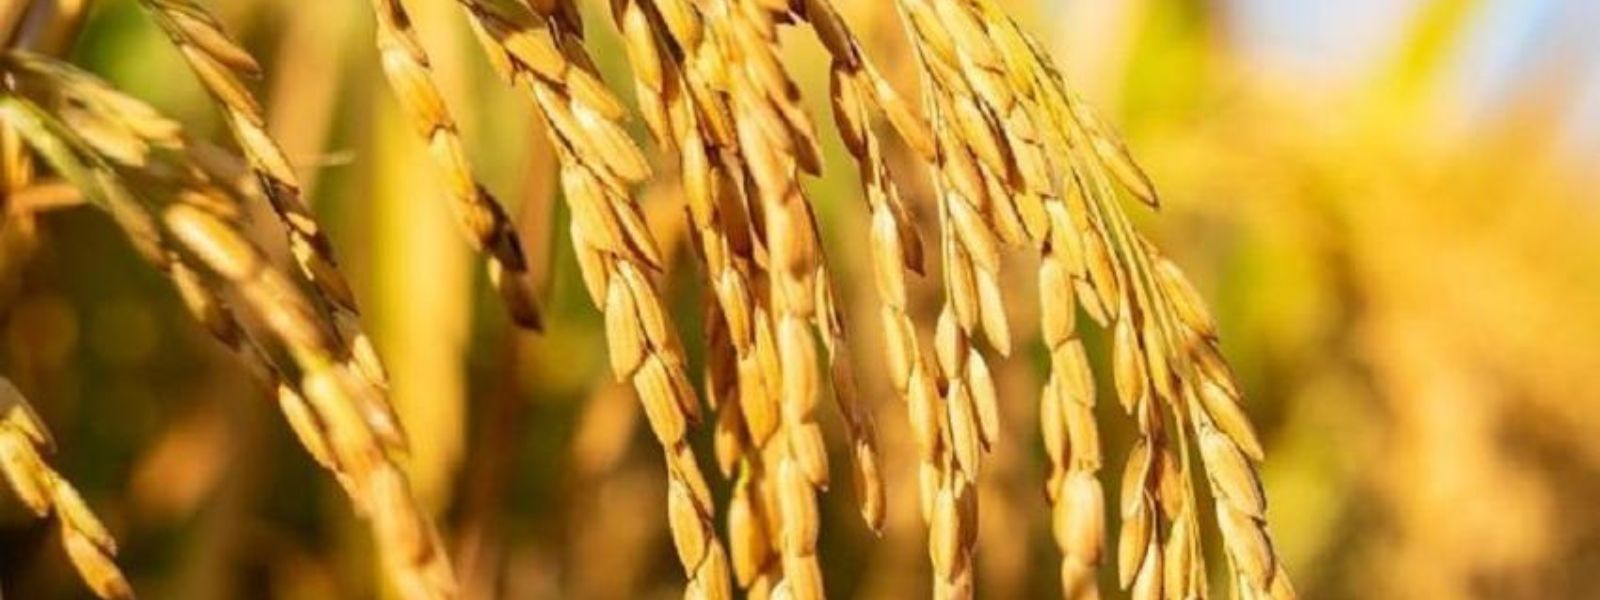 Rs.1 billion to be released to purchase paddy